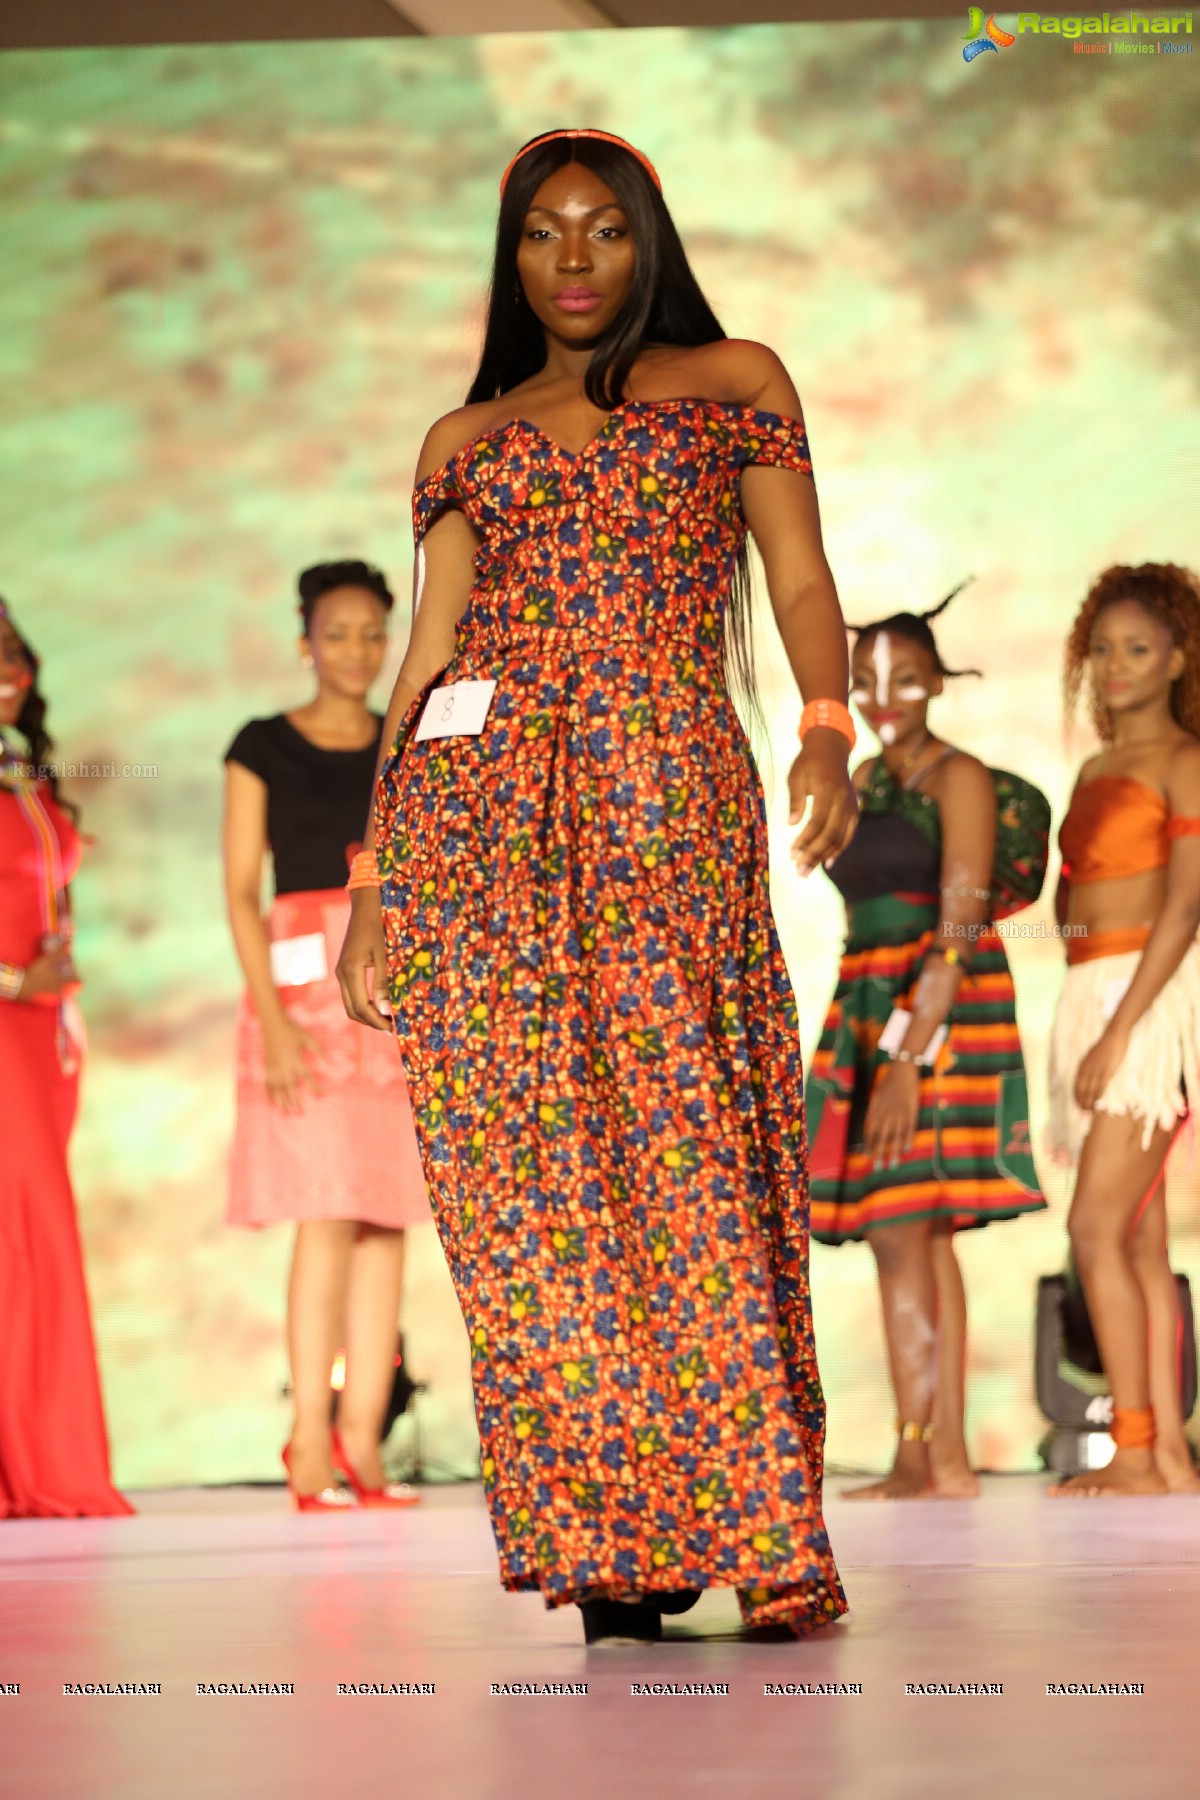 Miss Africa-India 2018 Grand Finale @ CyberCity Convention, Hyderabad